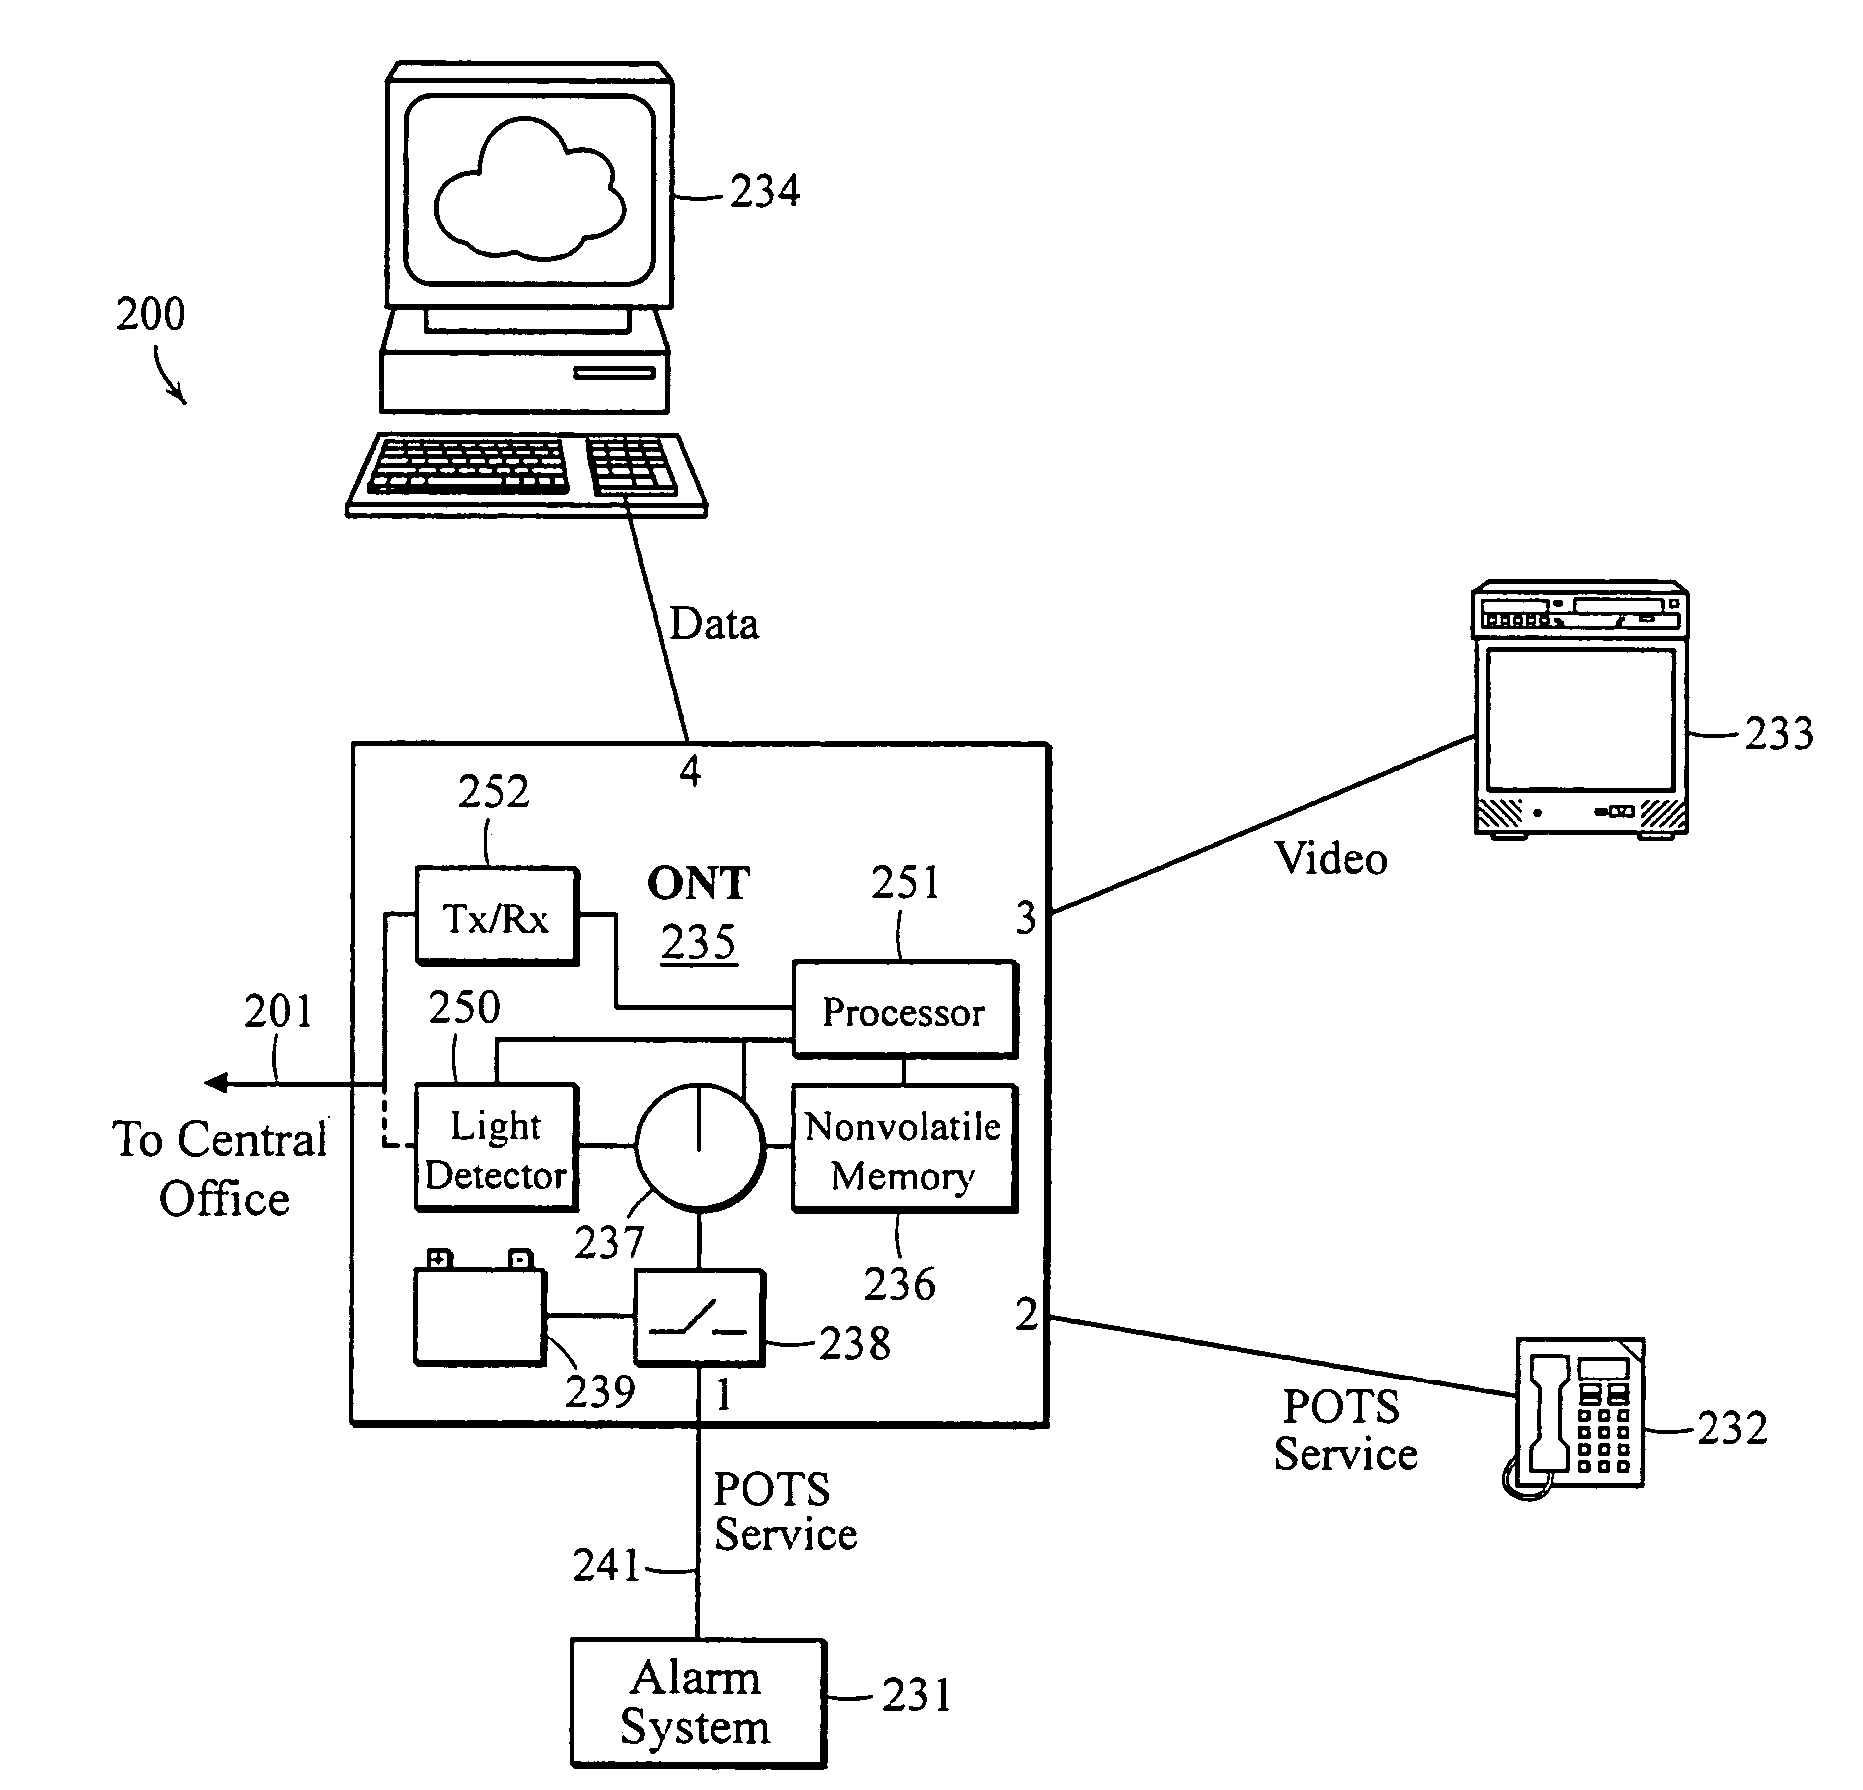 Apparatus and method of managing POTS lines in a PON network